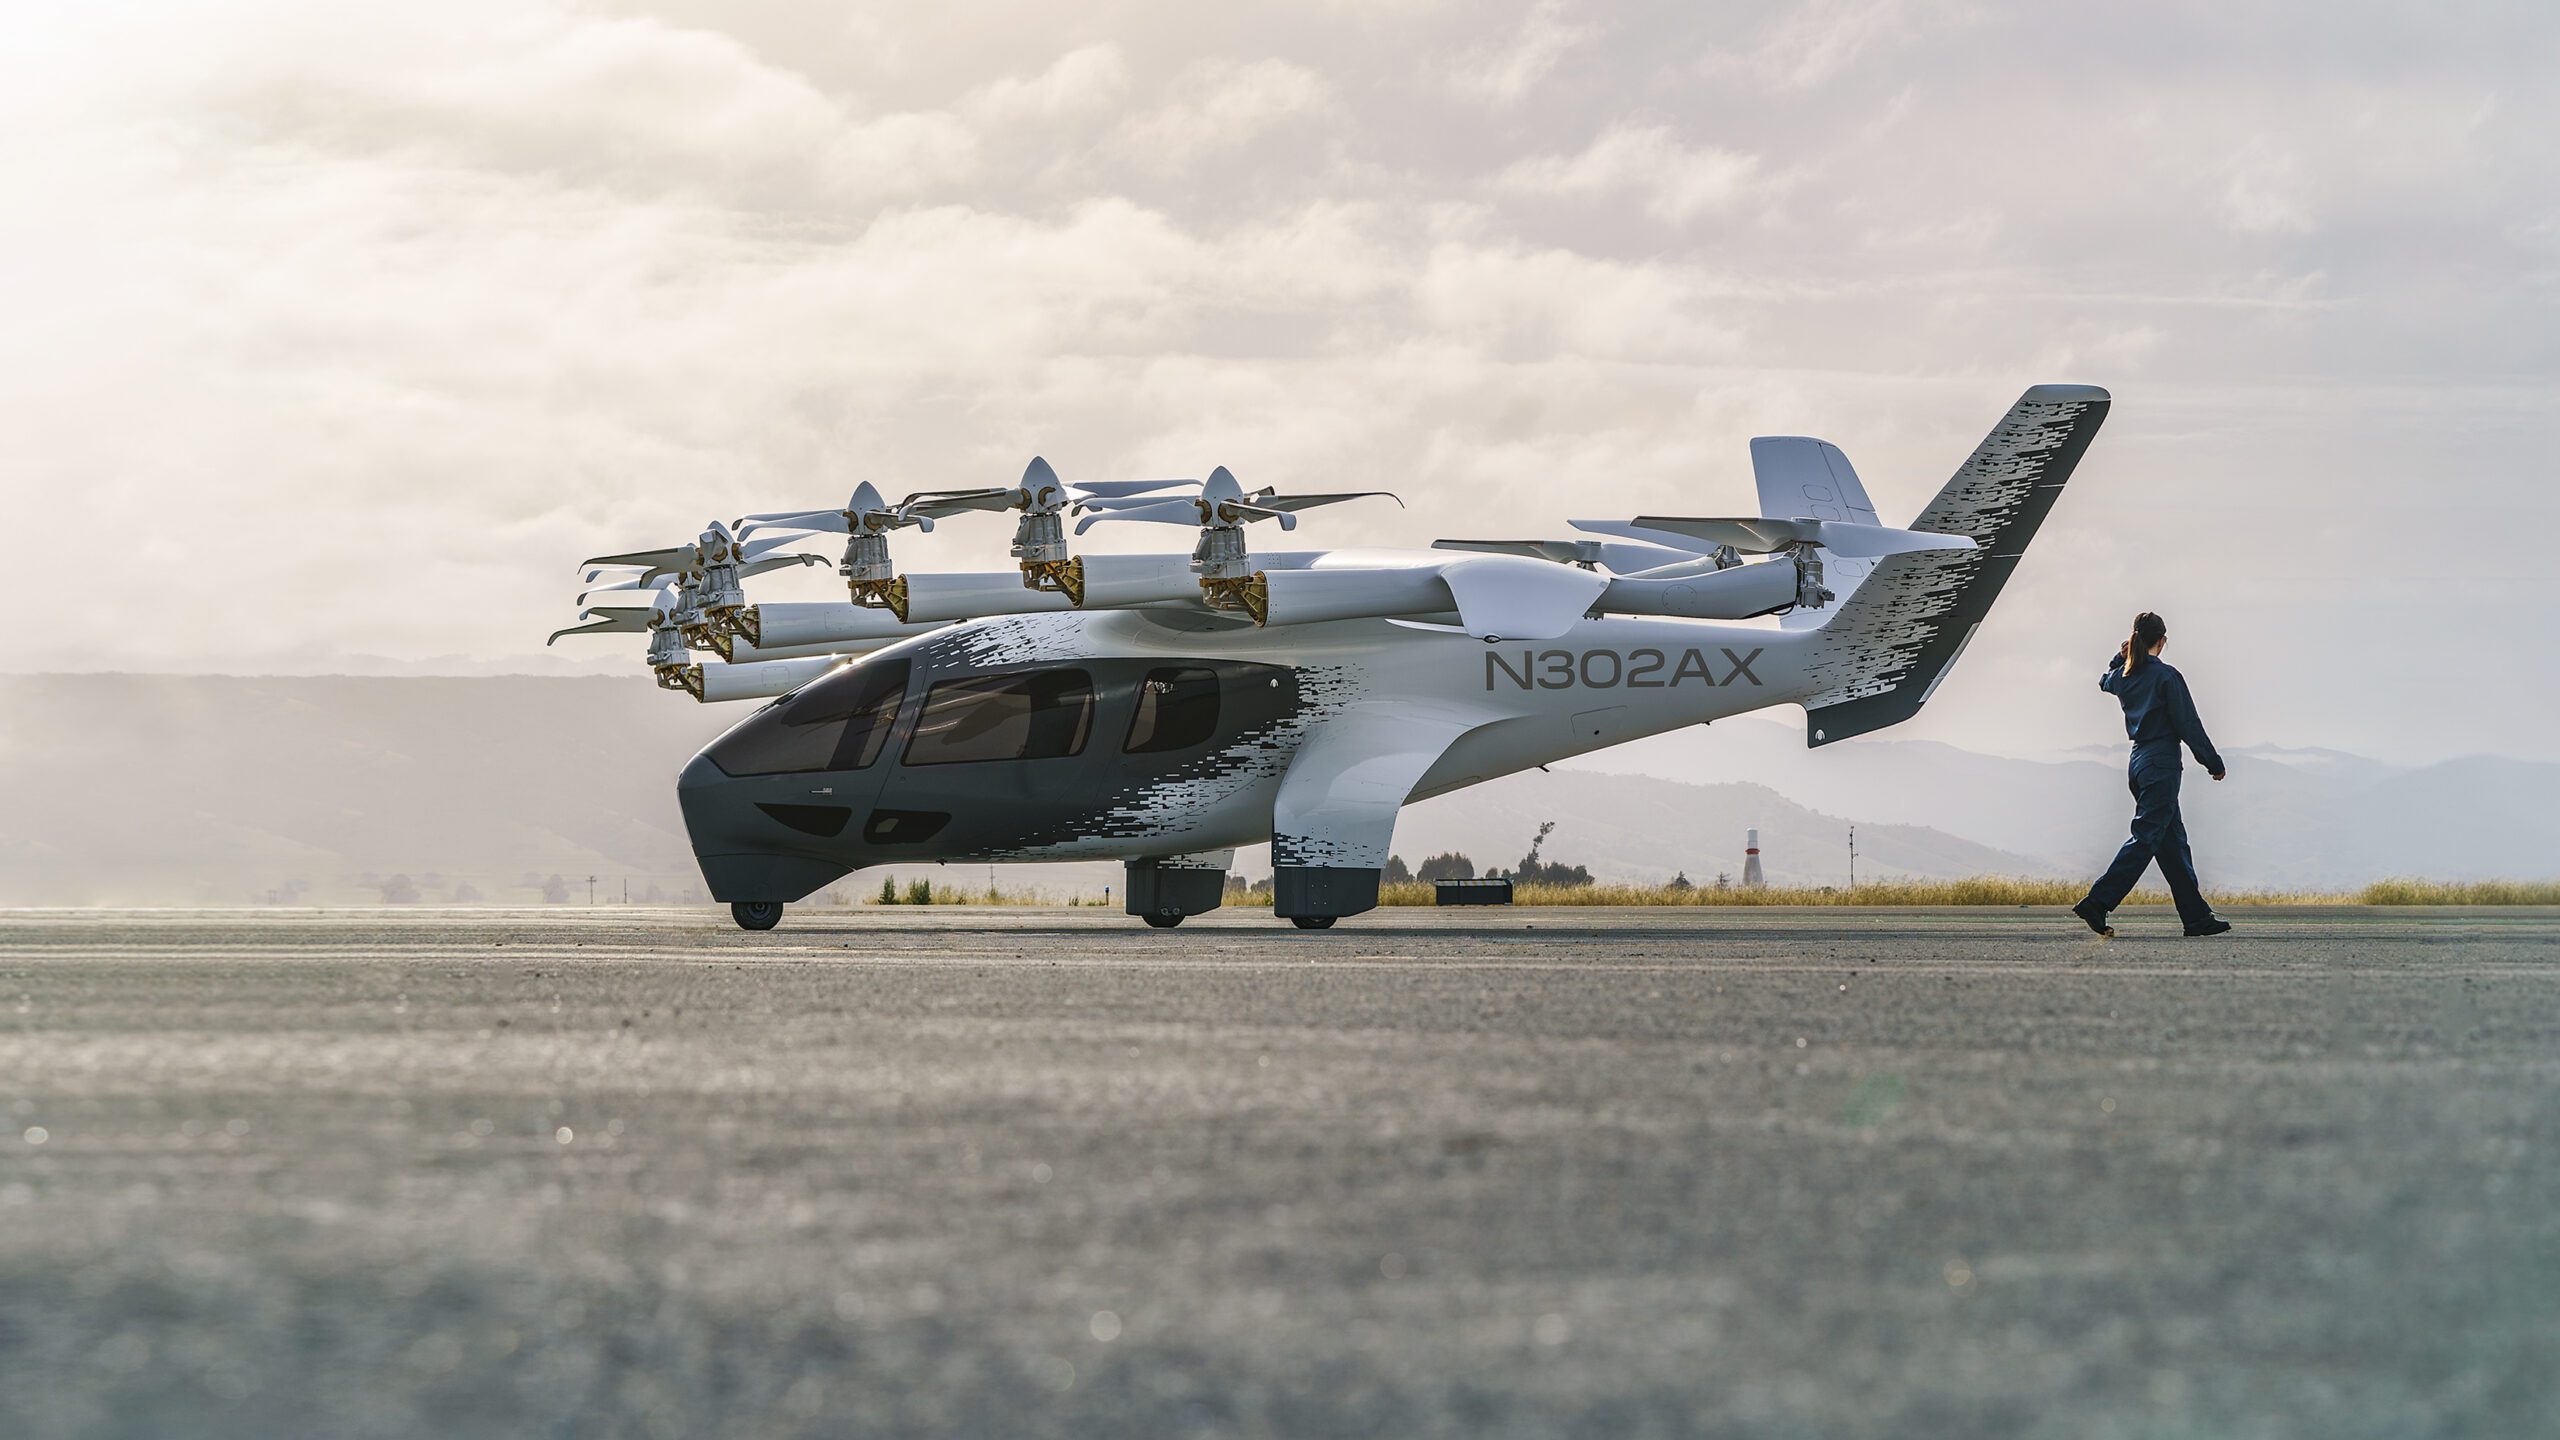 Airfield, Airport, Aircraft Archer Aviation this week became one of only two air taxi companies to receive certification as an airline from the US Federal Aviation Authority